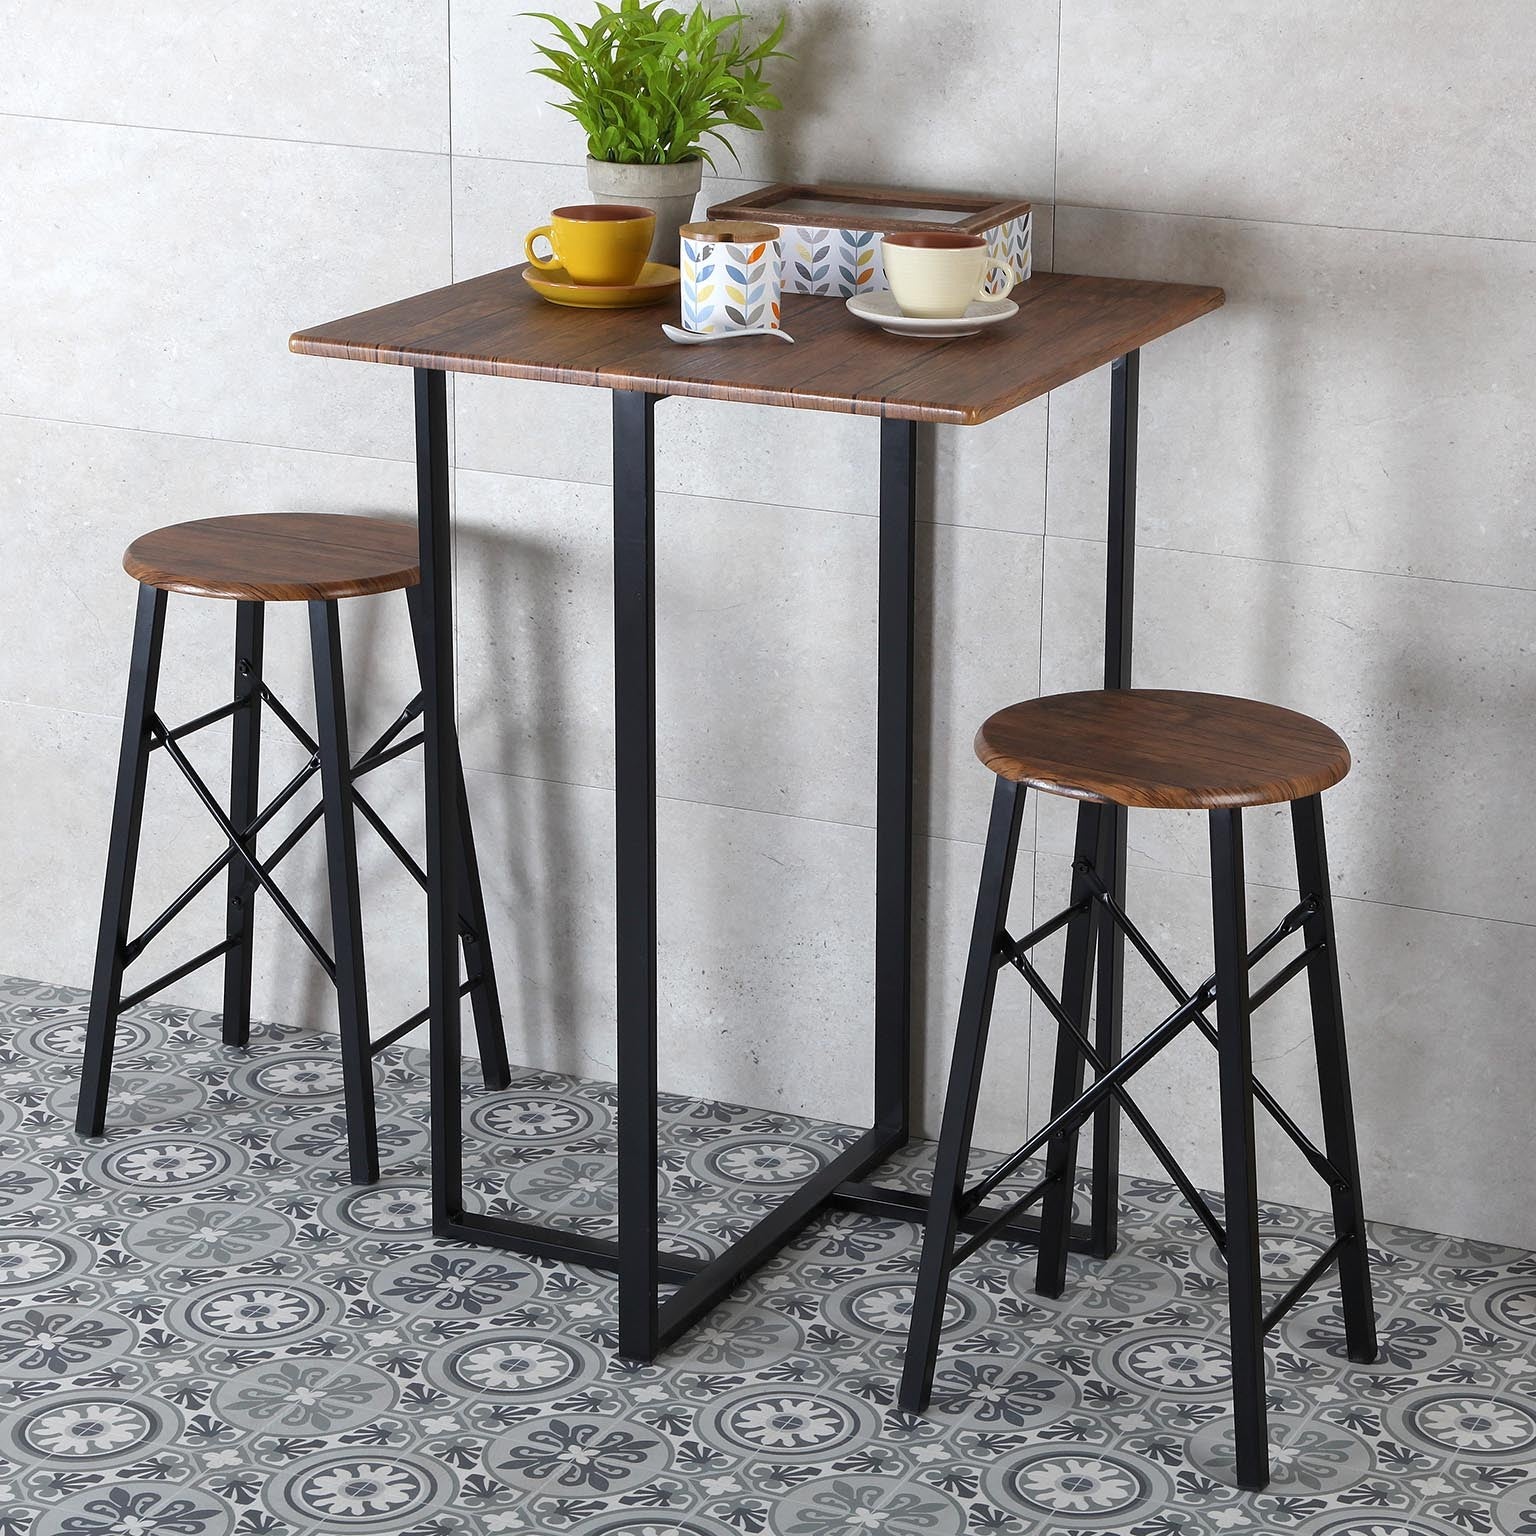 Loft Design Bar Table and 2 Stools in Brown Wood and Black Metal Versa